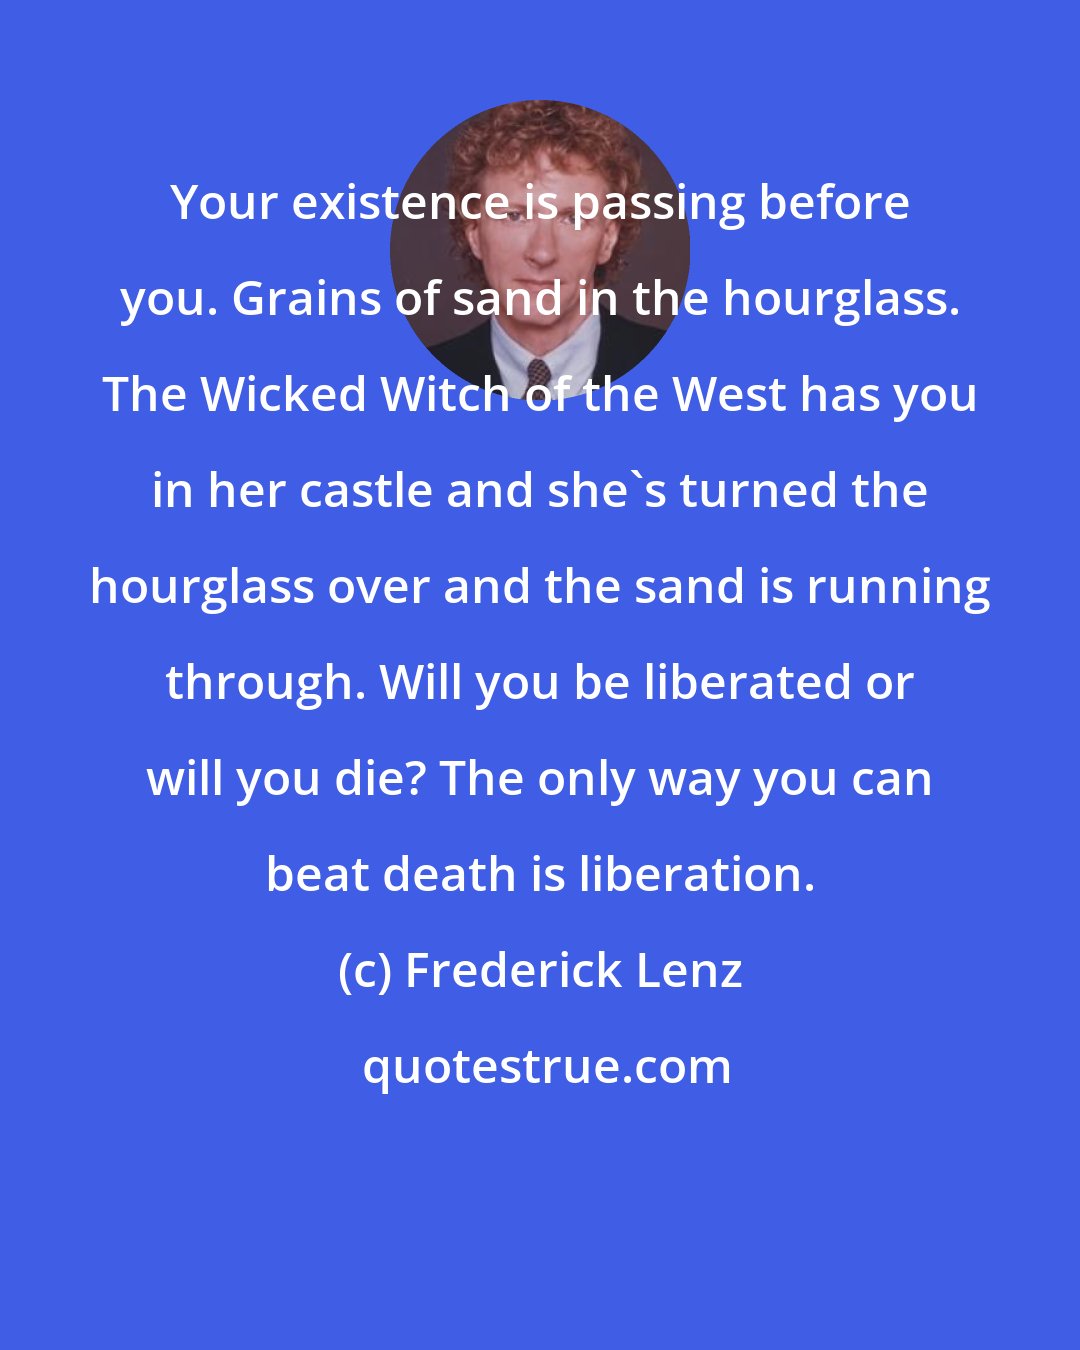 Frederick Lenz: Your existence is passing before you. Grains of sand in the hourglass. The Wicked Witch of the West has you in her castle and she's turned the hourglass over and the sand is running through. Will you be liberated or will you die? The only way you can beat death is liberation.